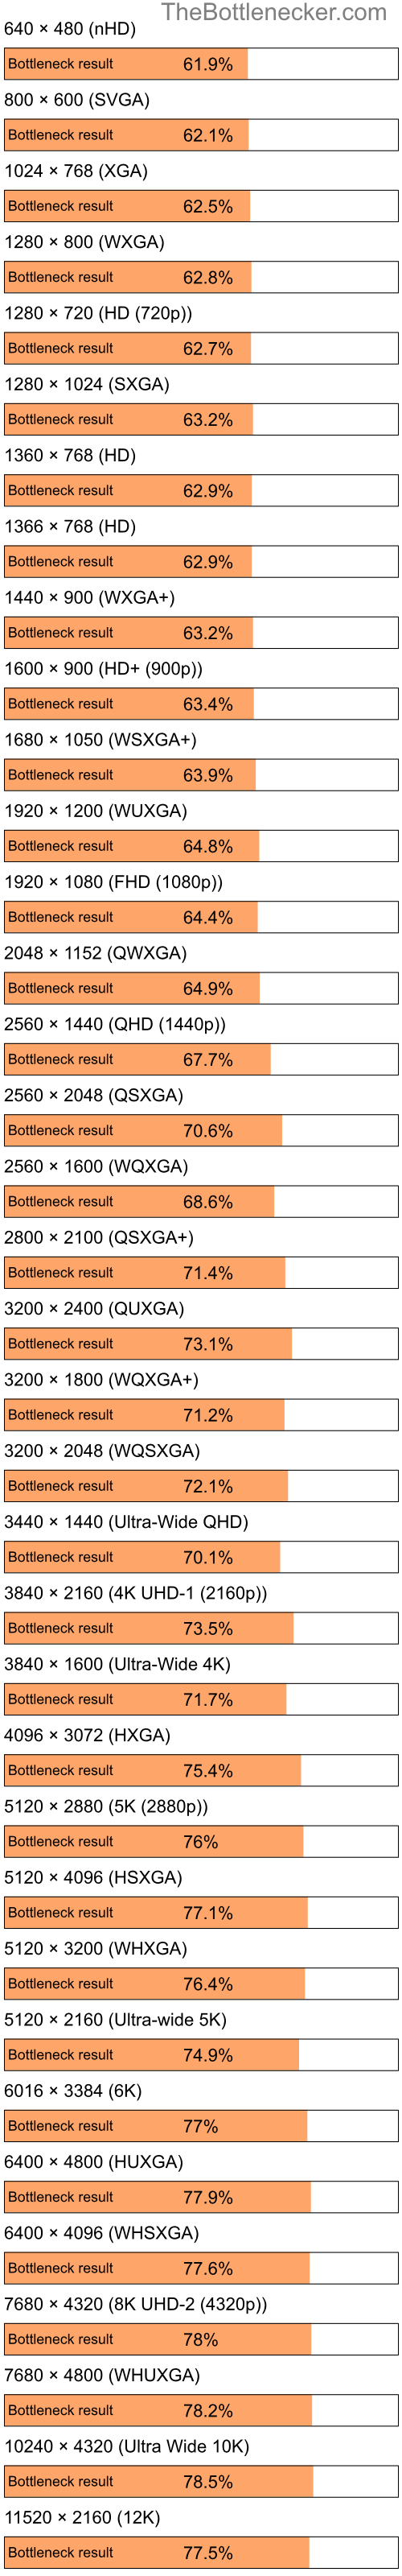 Bottleneck results by resolution for Intel Pentium 4 and AMD Radeon X1550 in Processor Intense Tasks